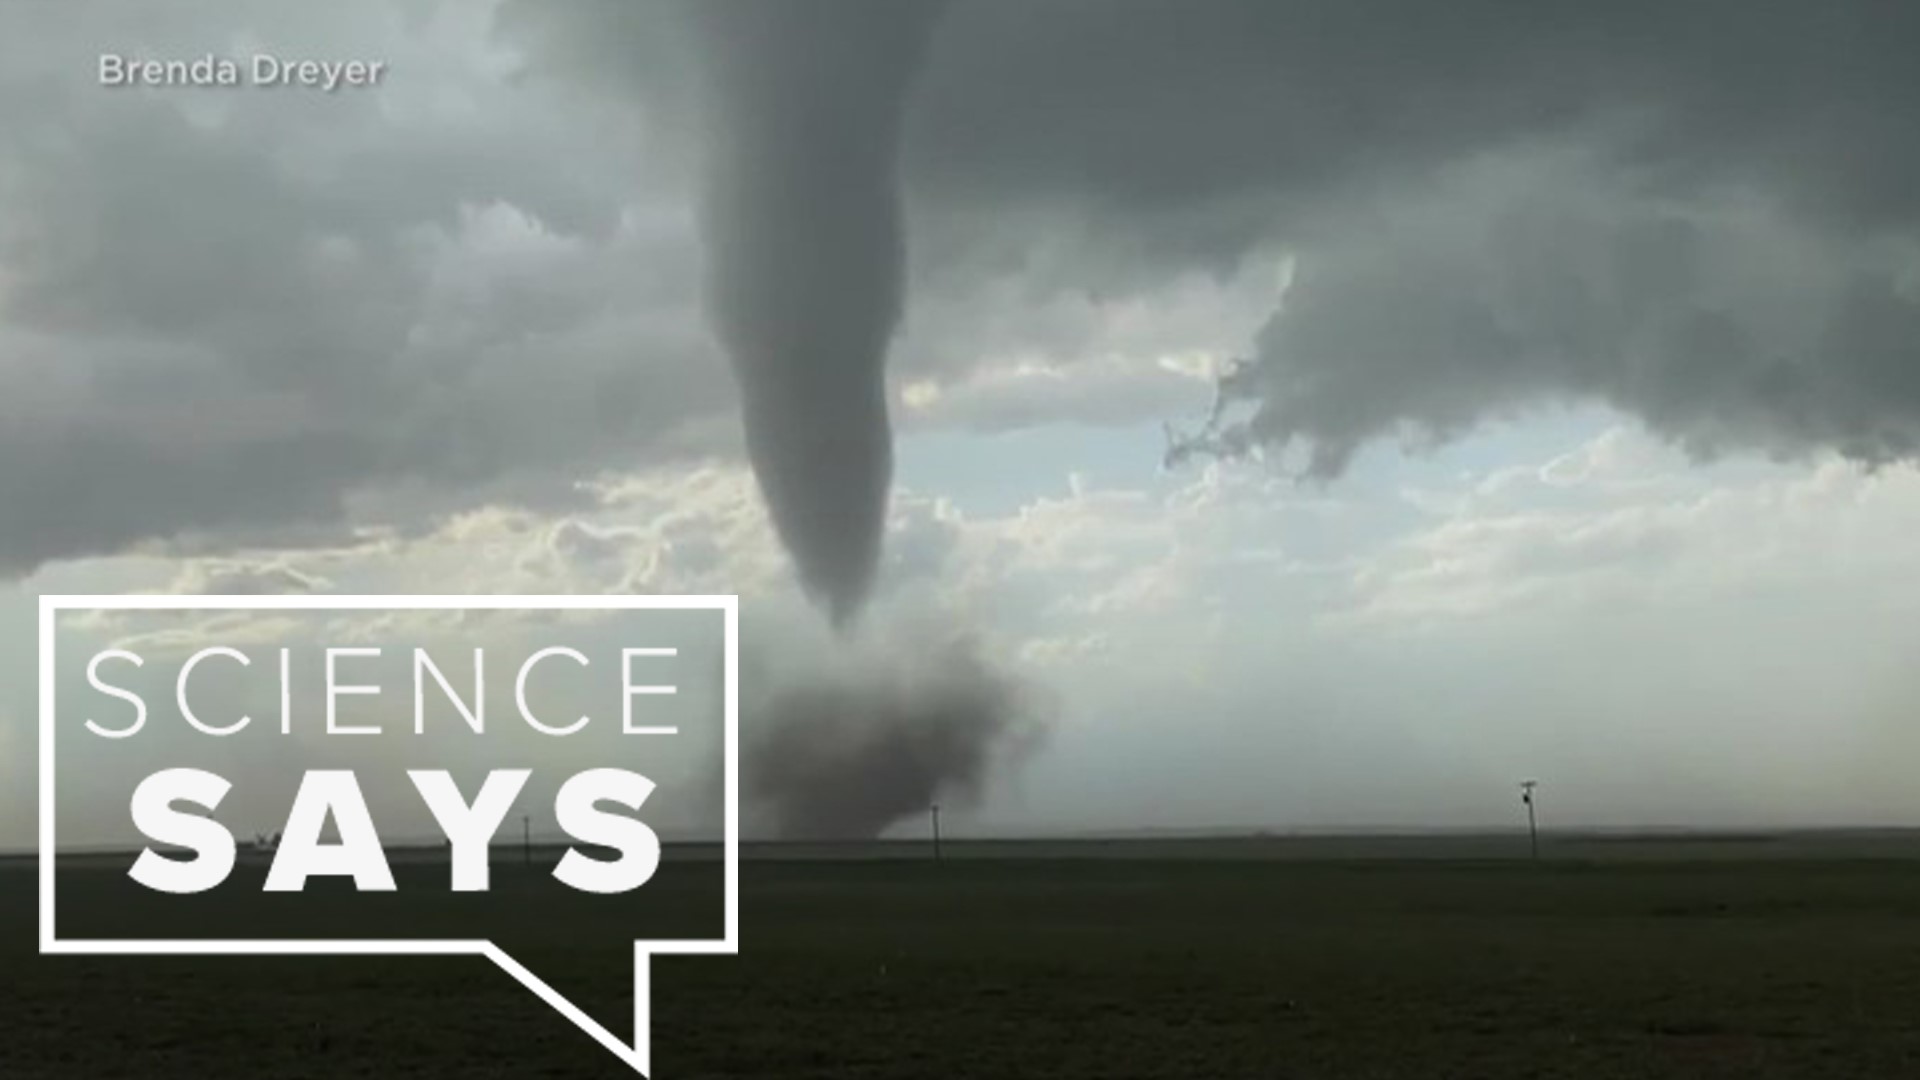 If you live in Arkansas, then you're no stranger to tornadoes. But did you know that not all funnels in the sky are created equal?